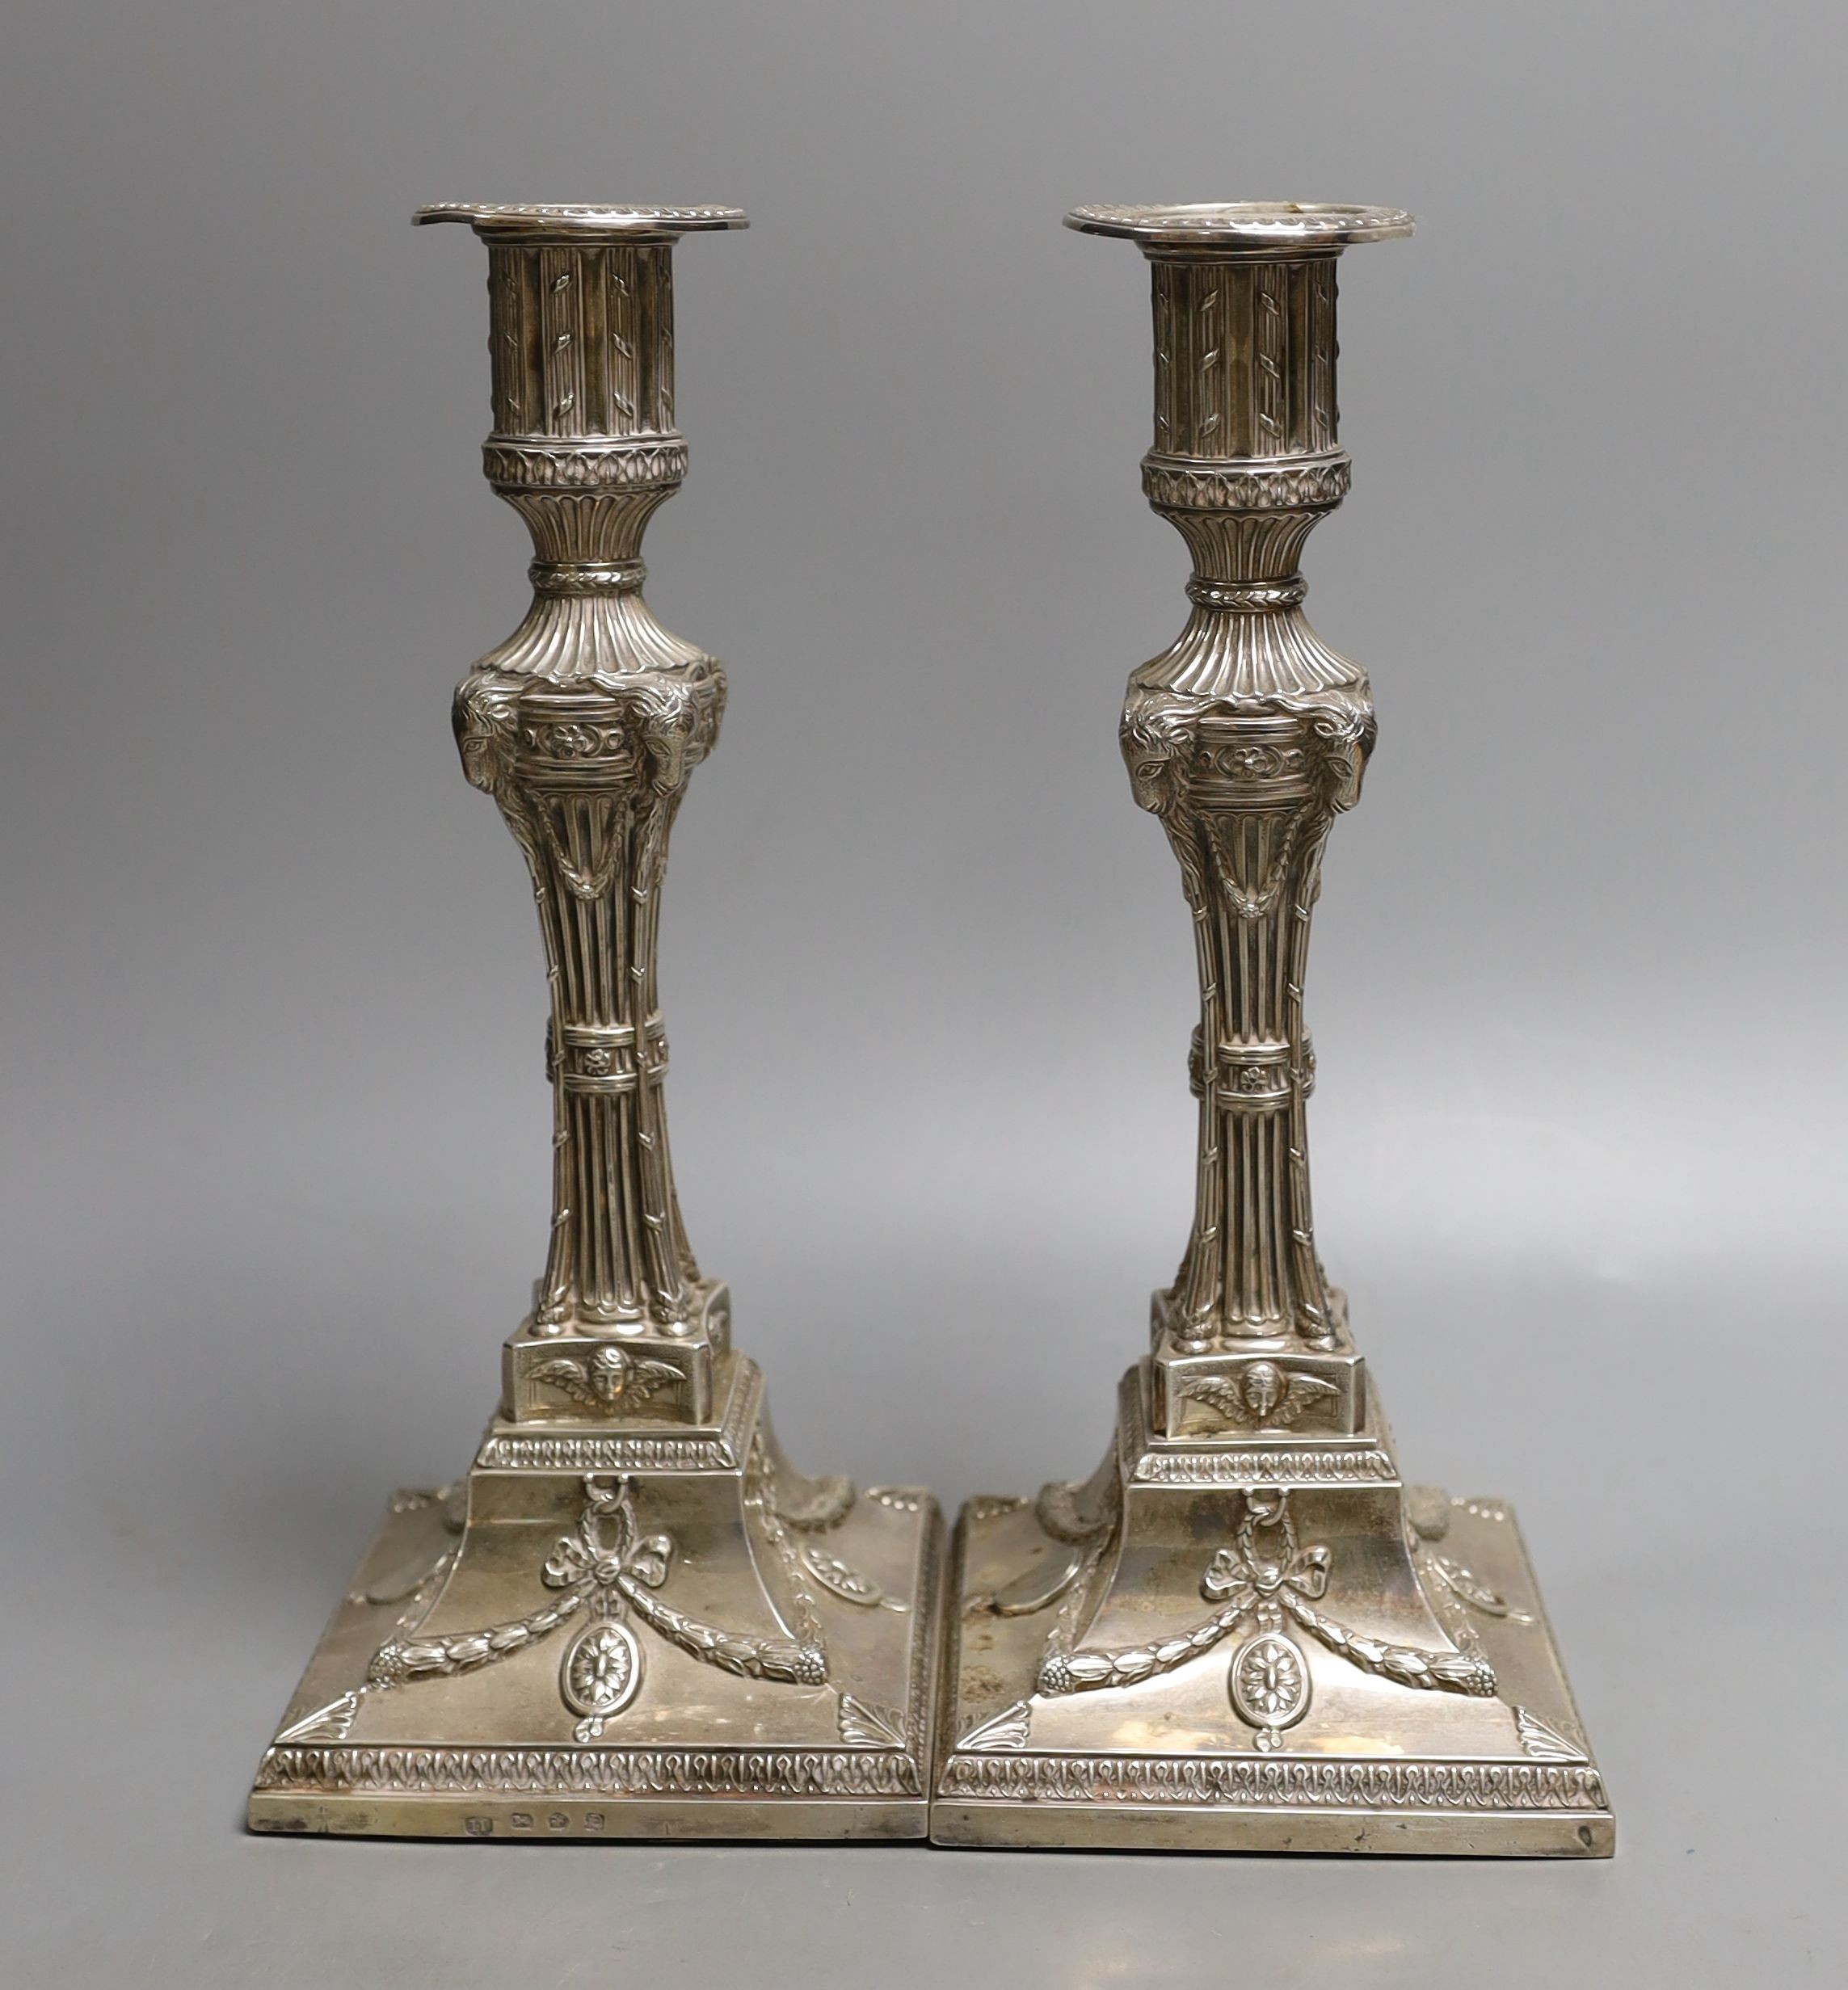 A matched pair of George III silver candlesticks, with waisted fluted stems and rams head, winged mask and swag decoration, Joseph Tibbitts, Sheffield, 1775 and George Ashforth & Co, Sheffield, 1775 29.4cm, weighted.